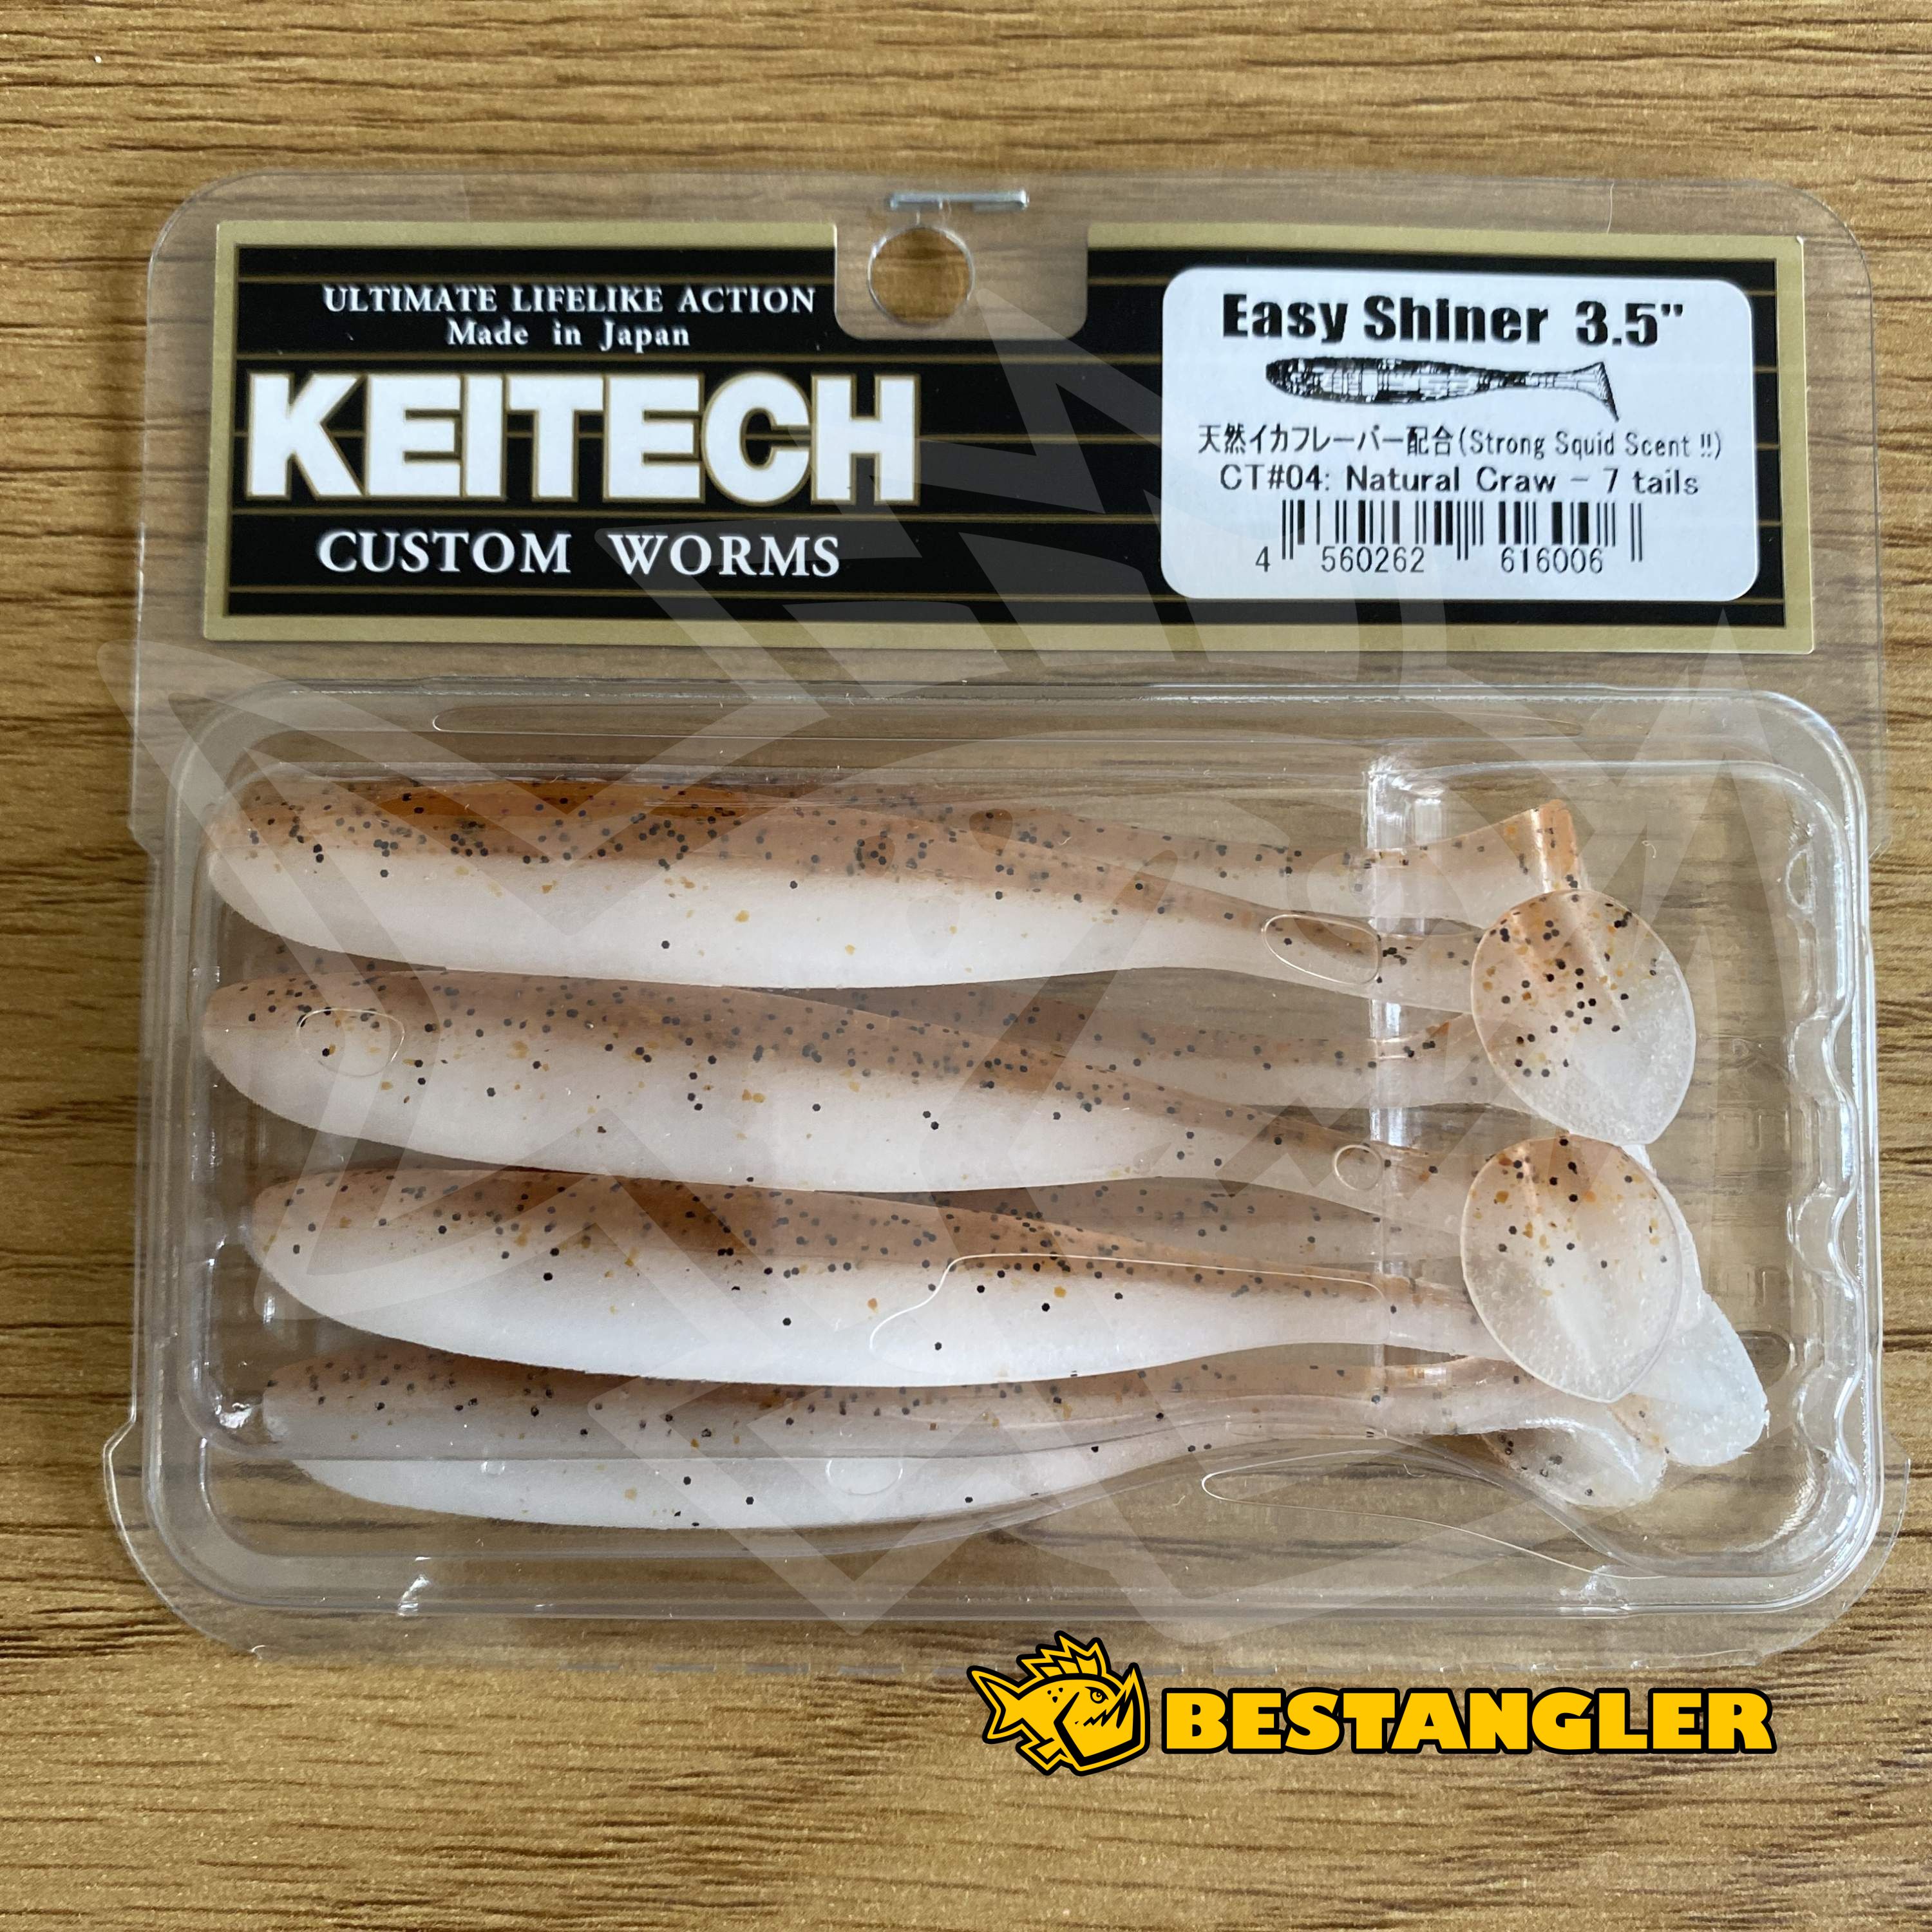 Keitech Easy Shiner 3.5 Natural Craw